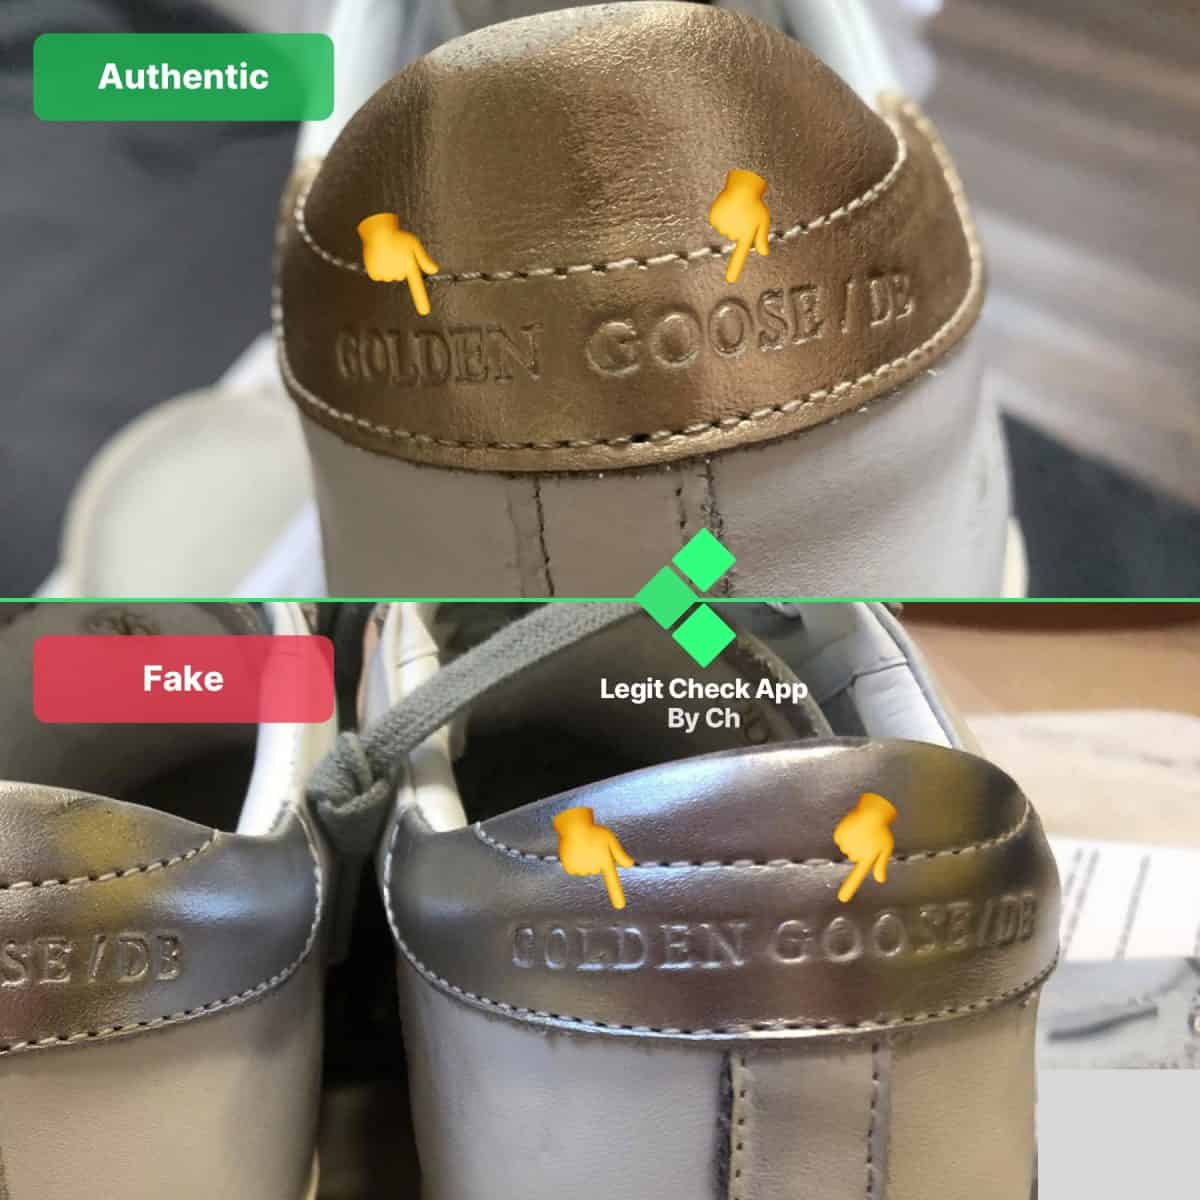 how to spot real vs fake golden goose sneakers